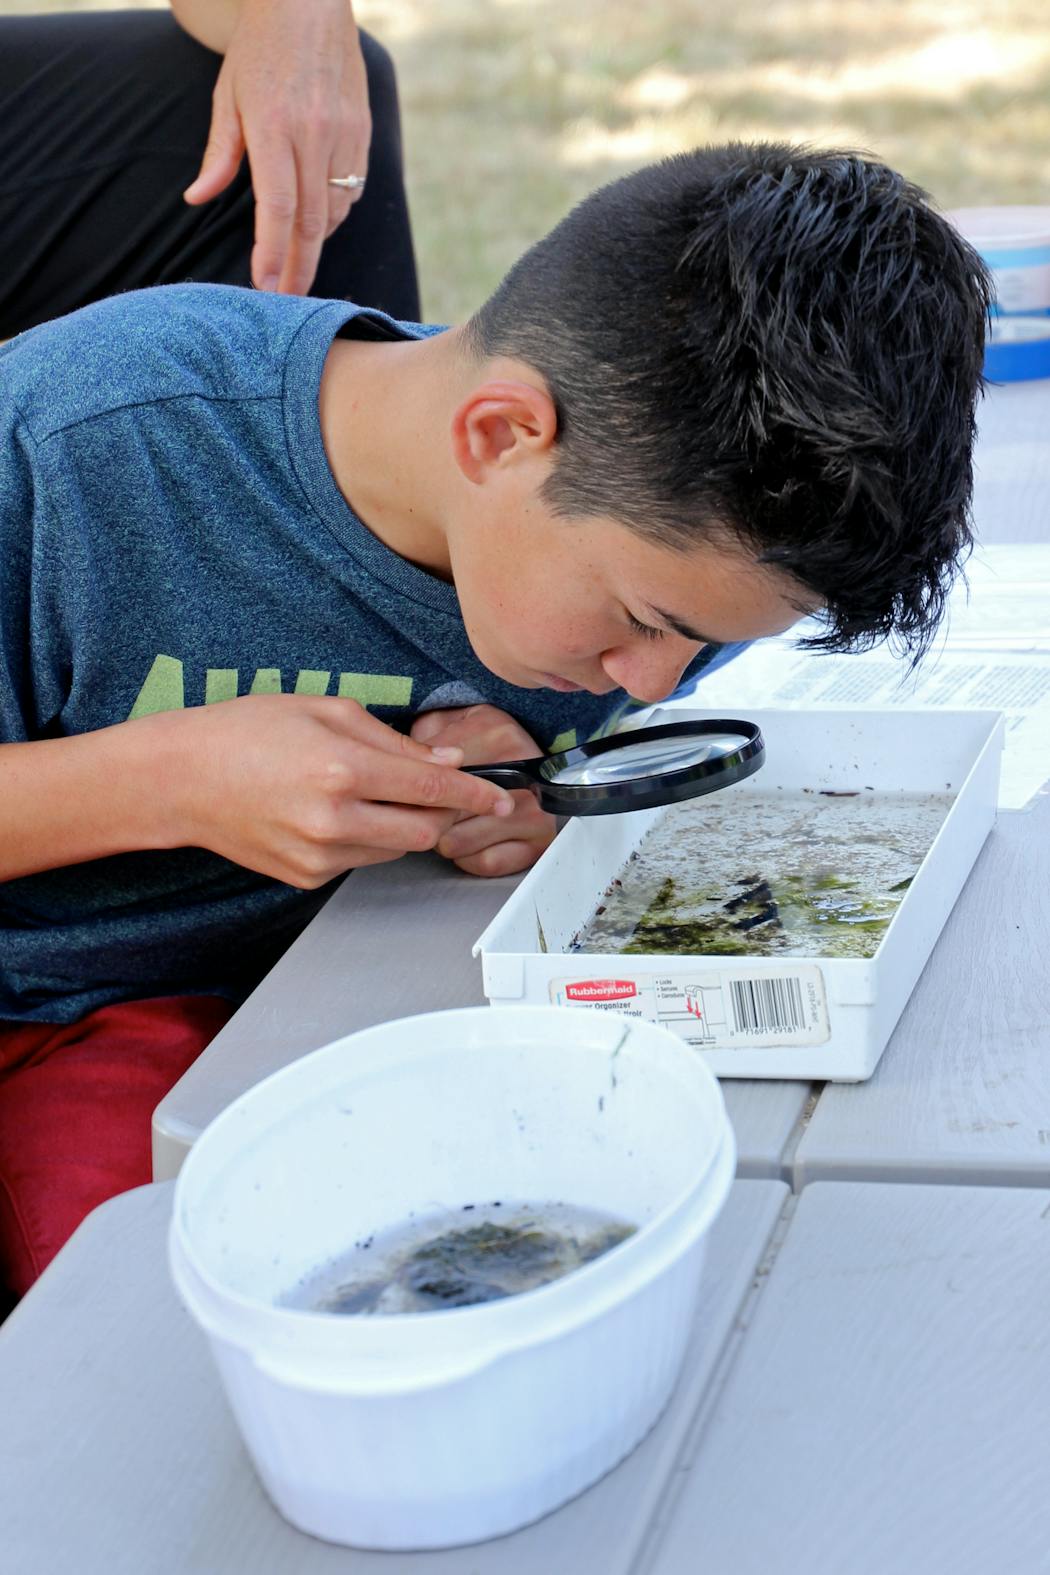 Kids also get on-shore lessons that teach them about water quality and bugs.